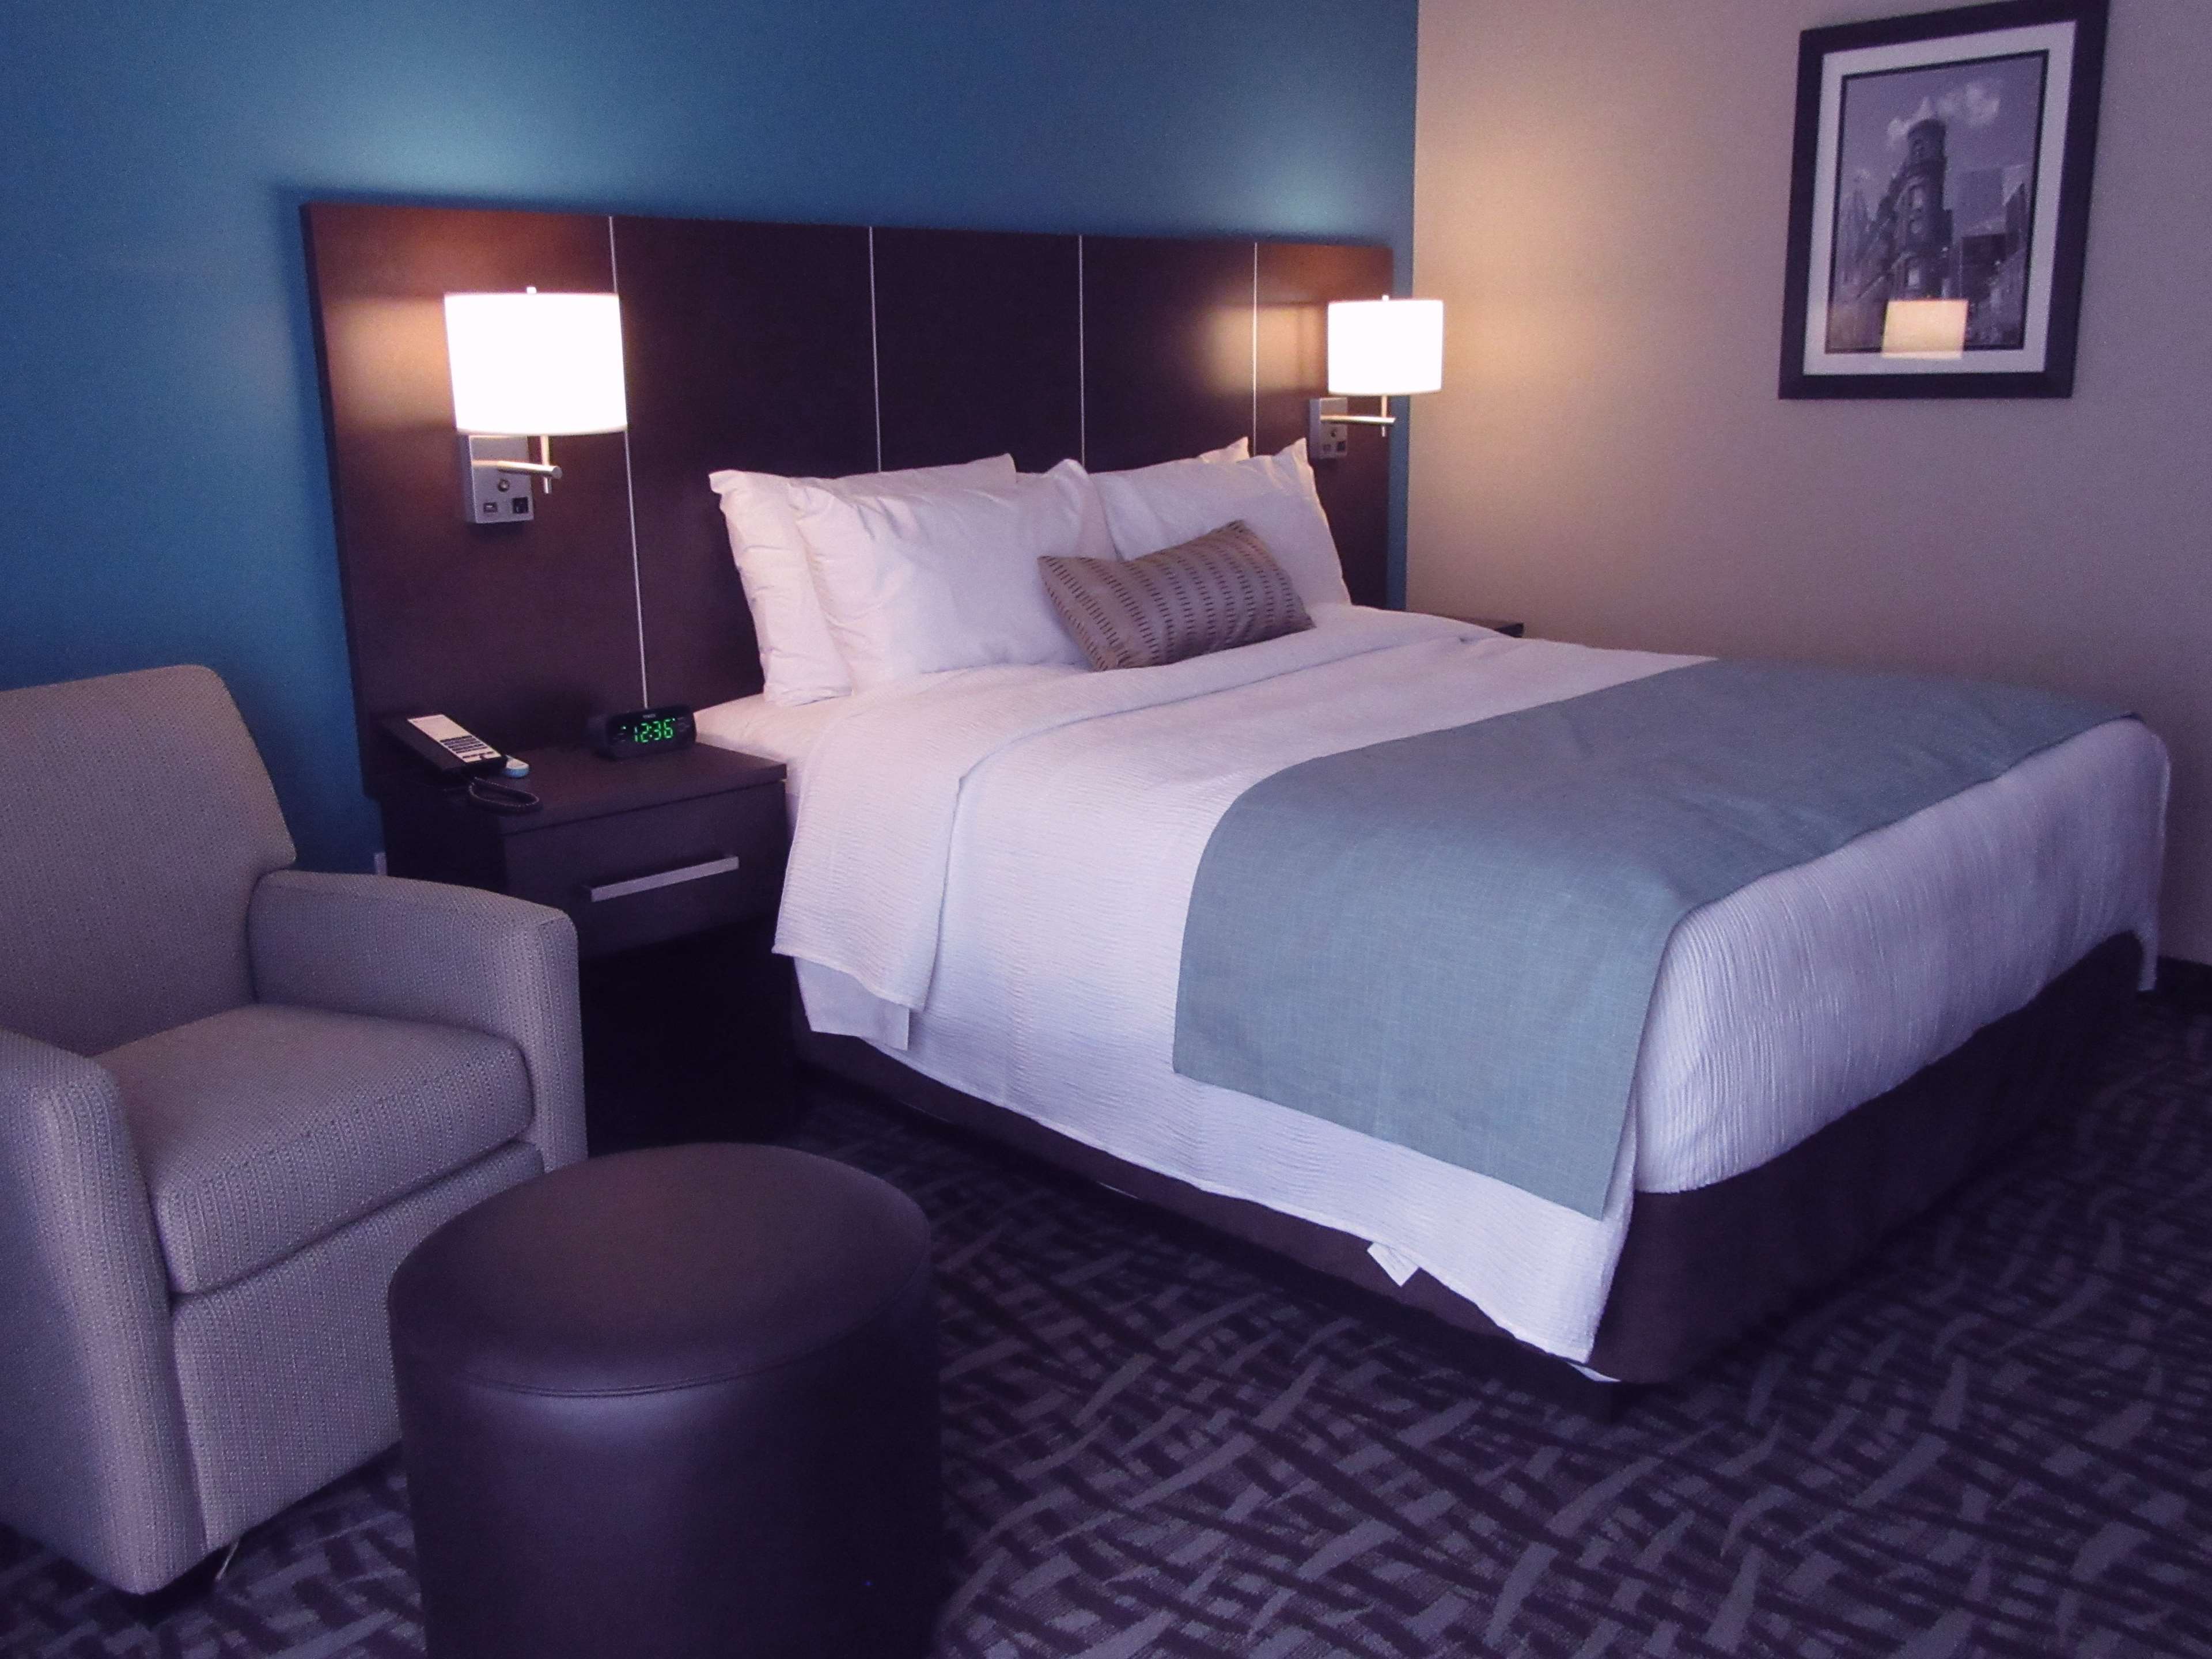 Guest Room Best Western Plus Hotel Montreal Montreal (514)903-1895